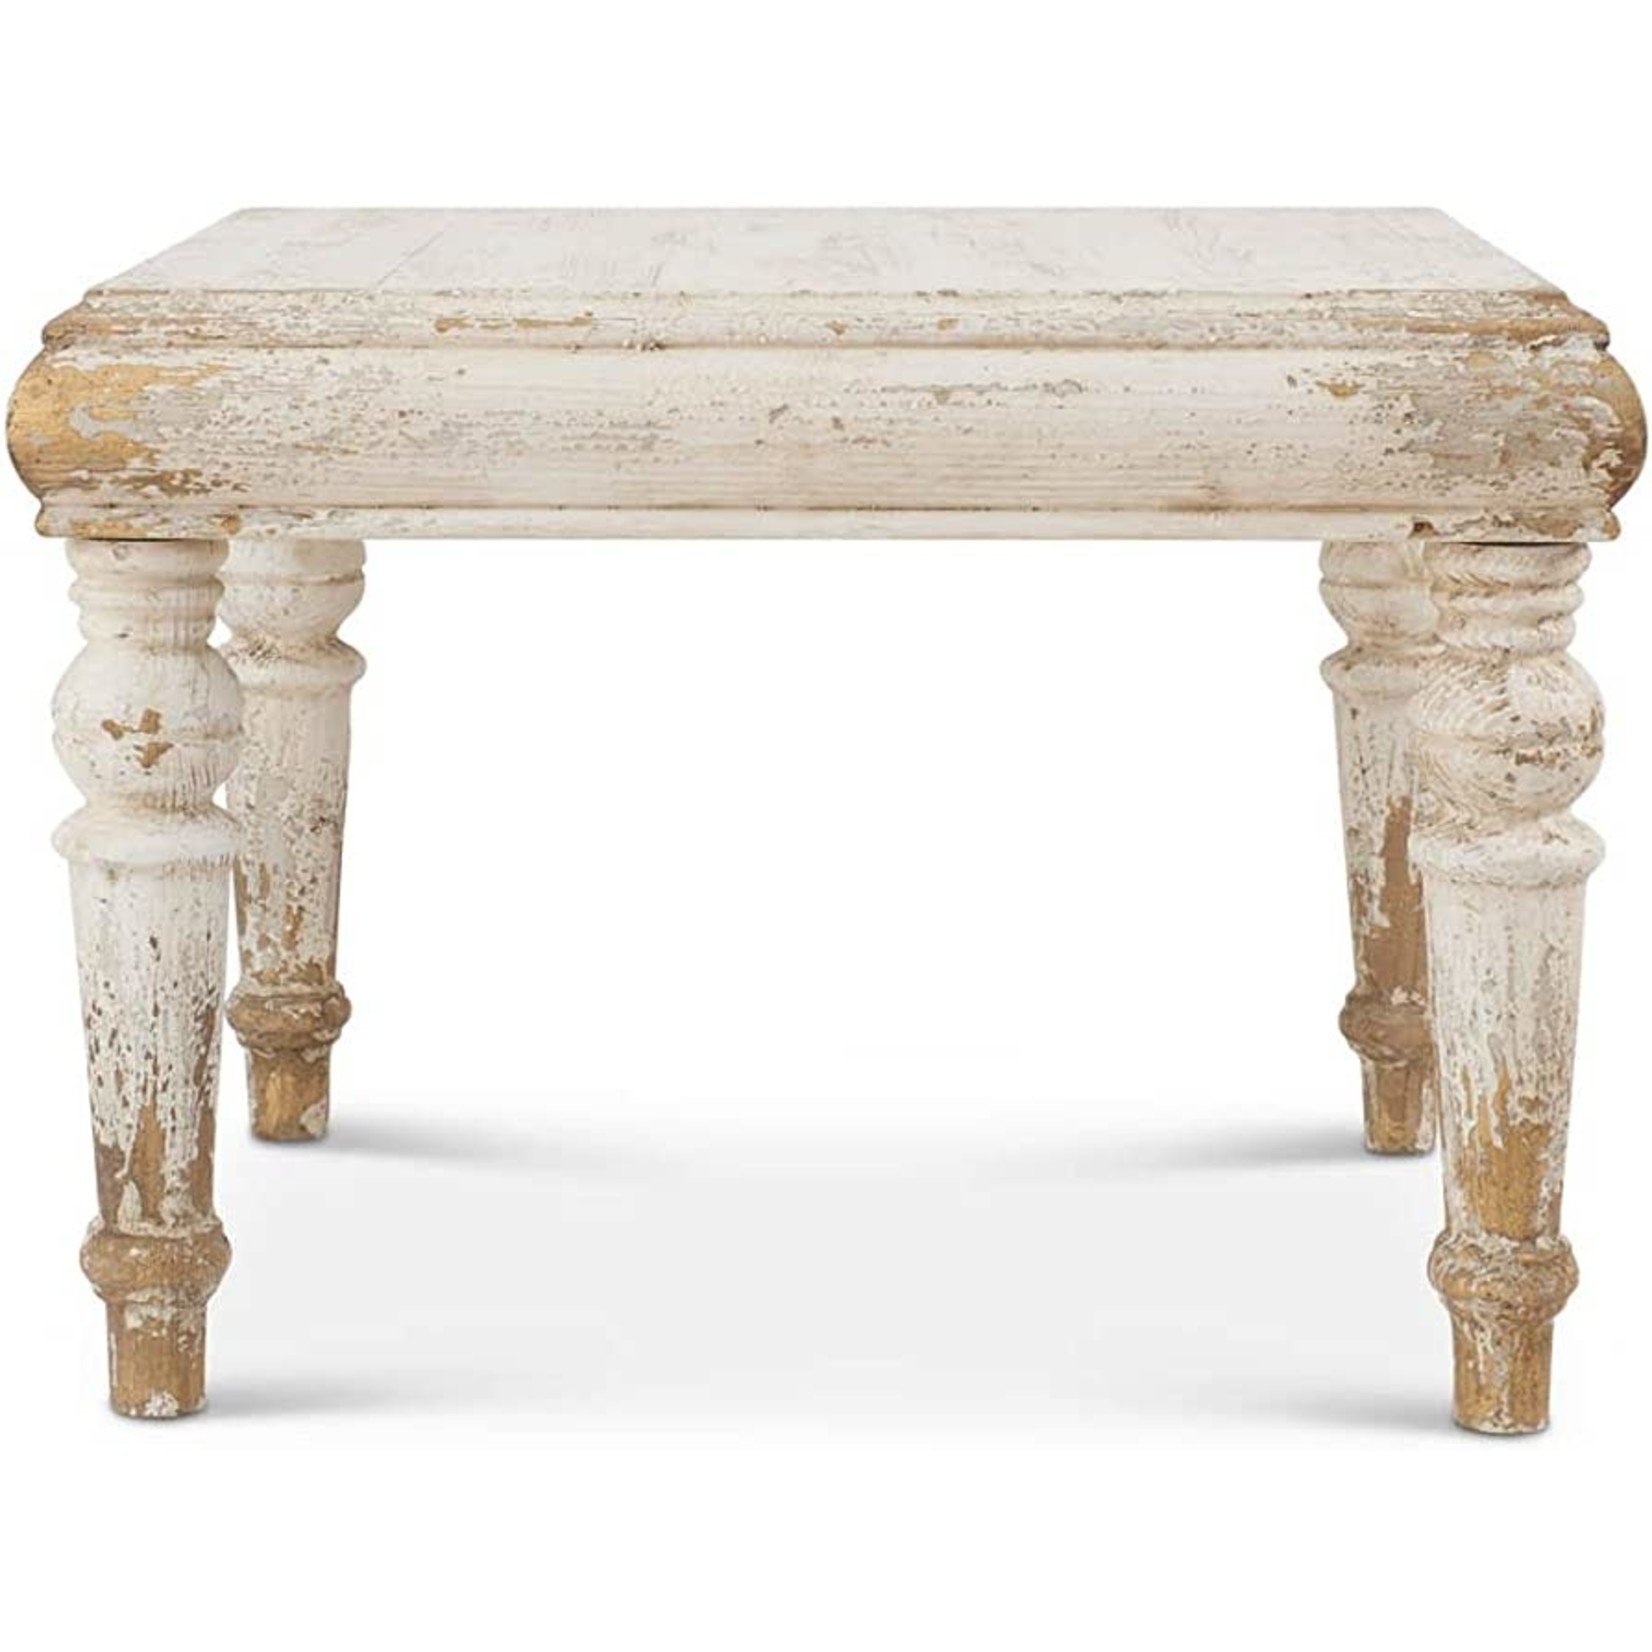 SQUARE DISTRESSED WHITEWASHED & GOLD END TABLE